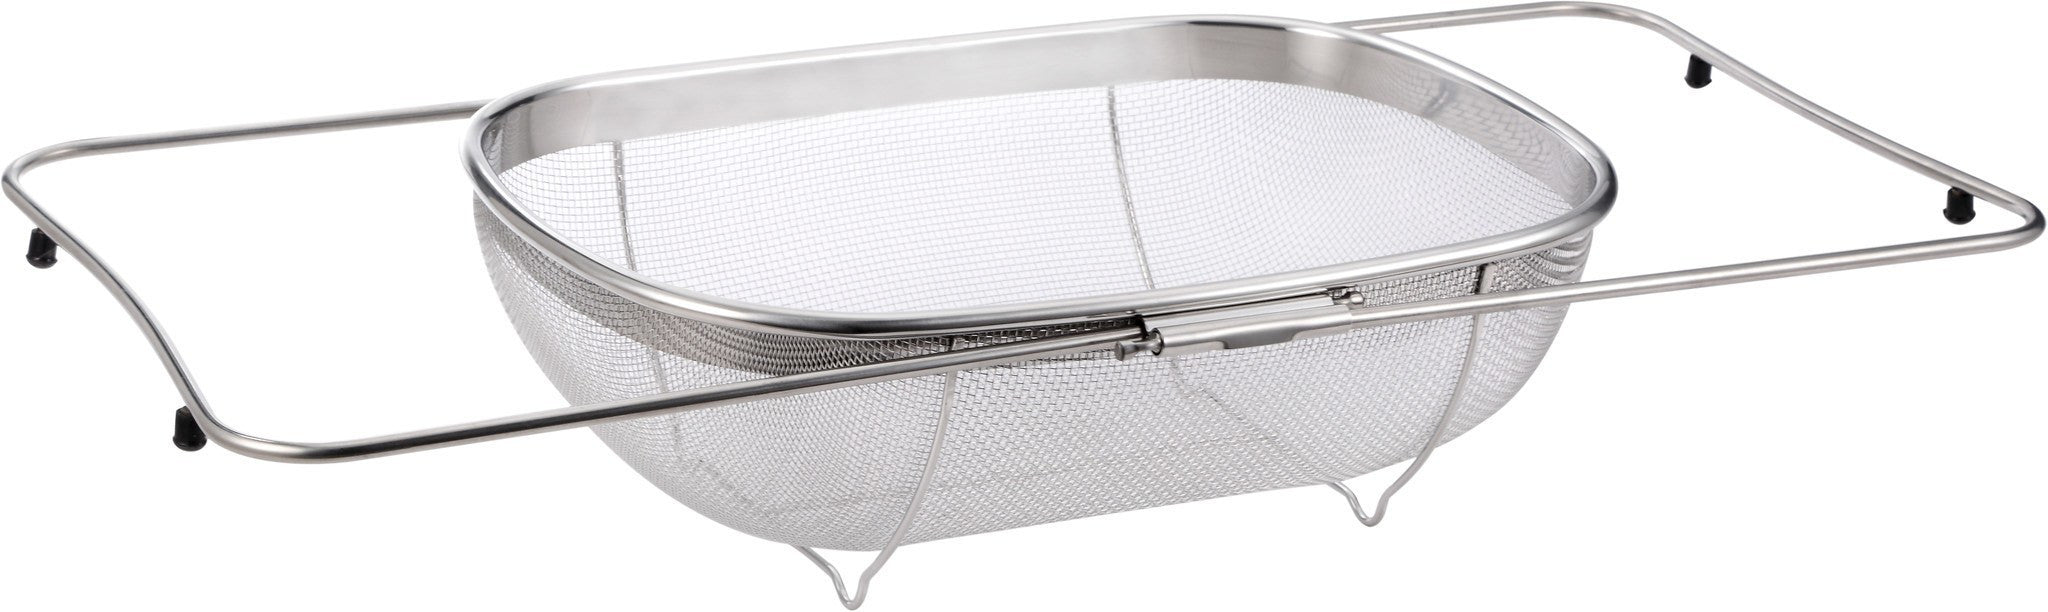 Pro Chef Kitchen Tools Stainless Steel Over the Sink Strainer - 6